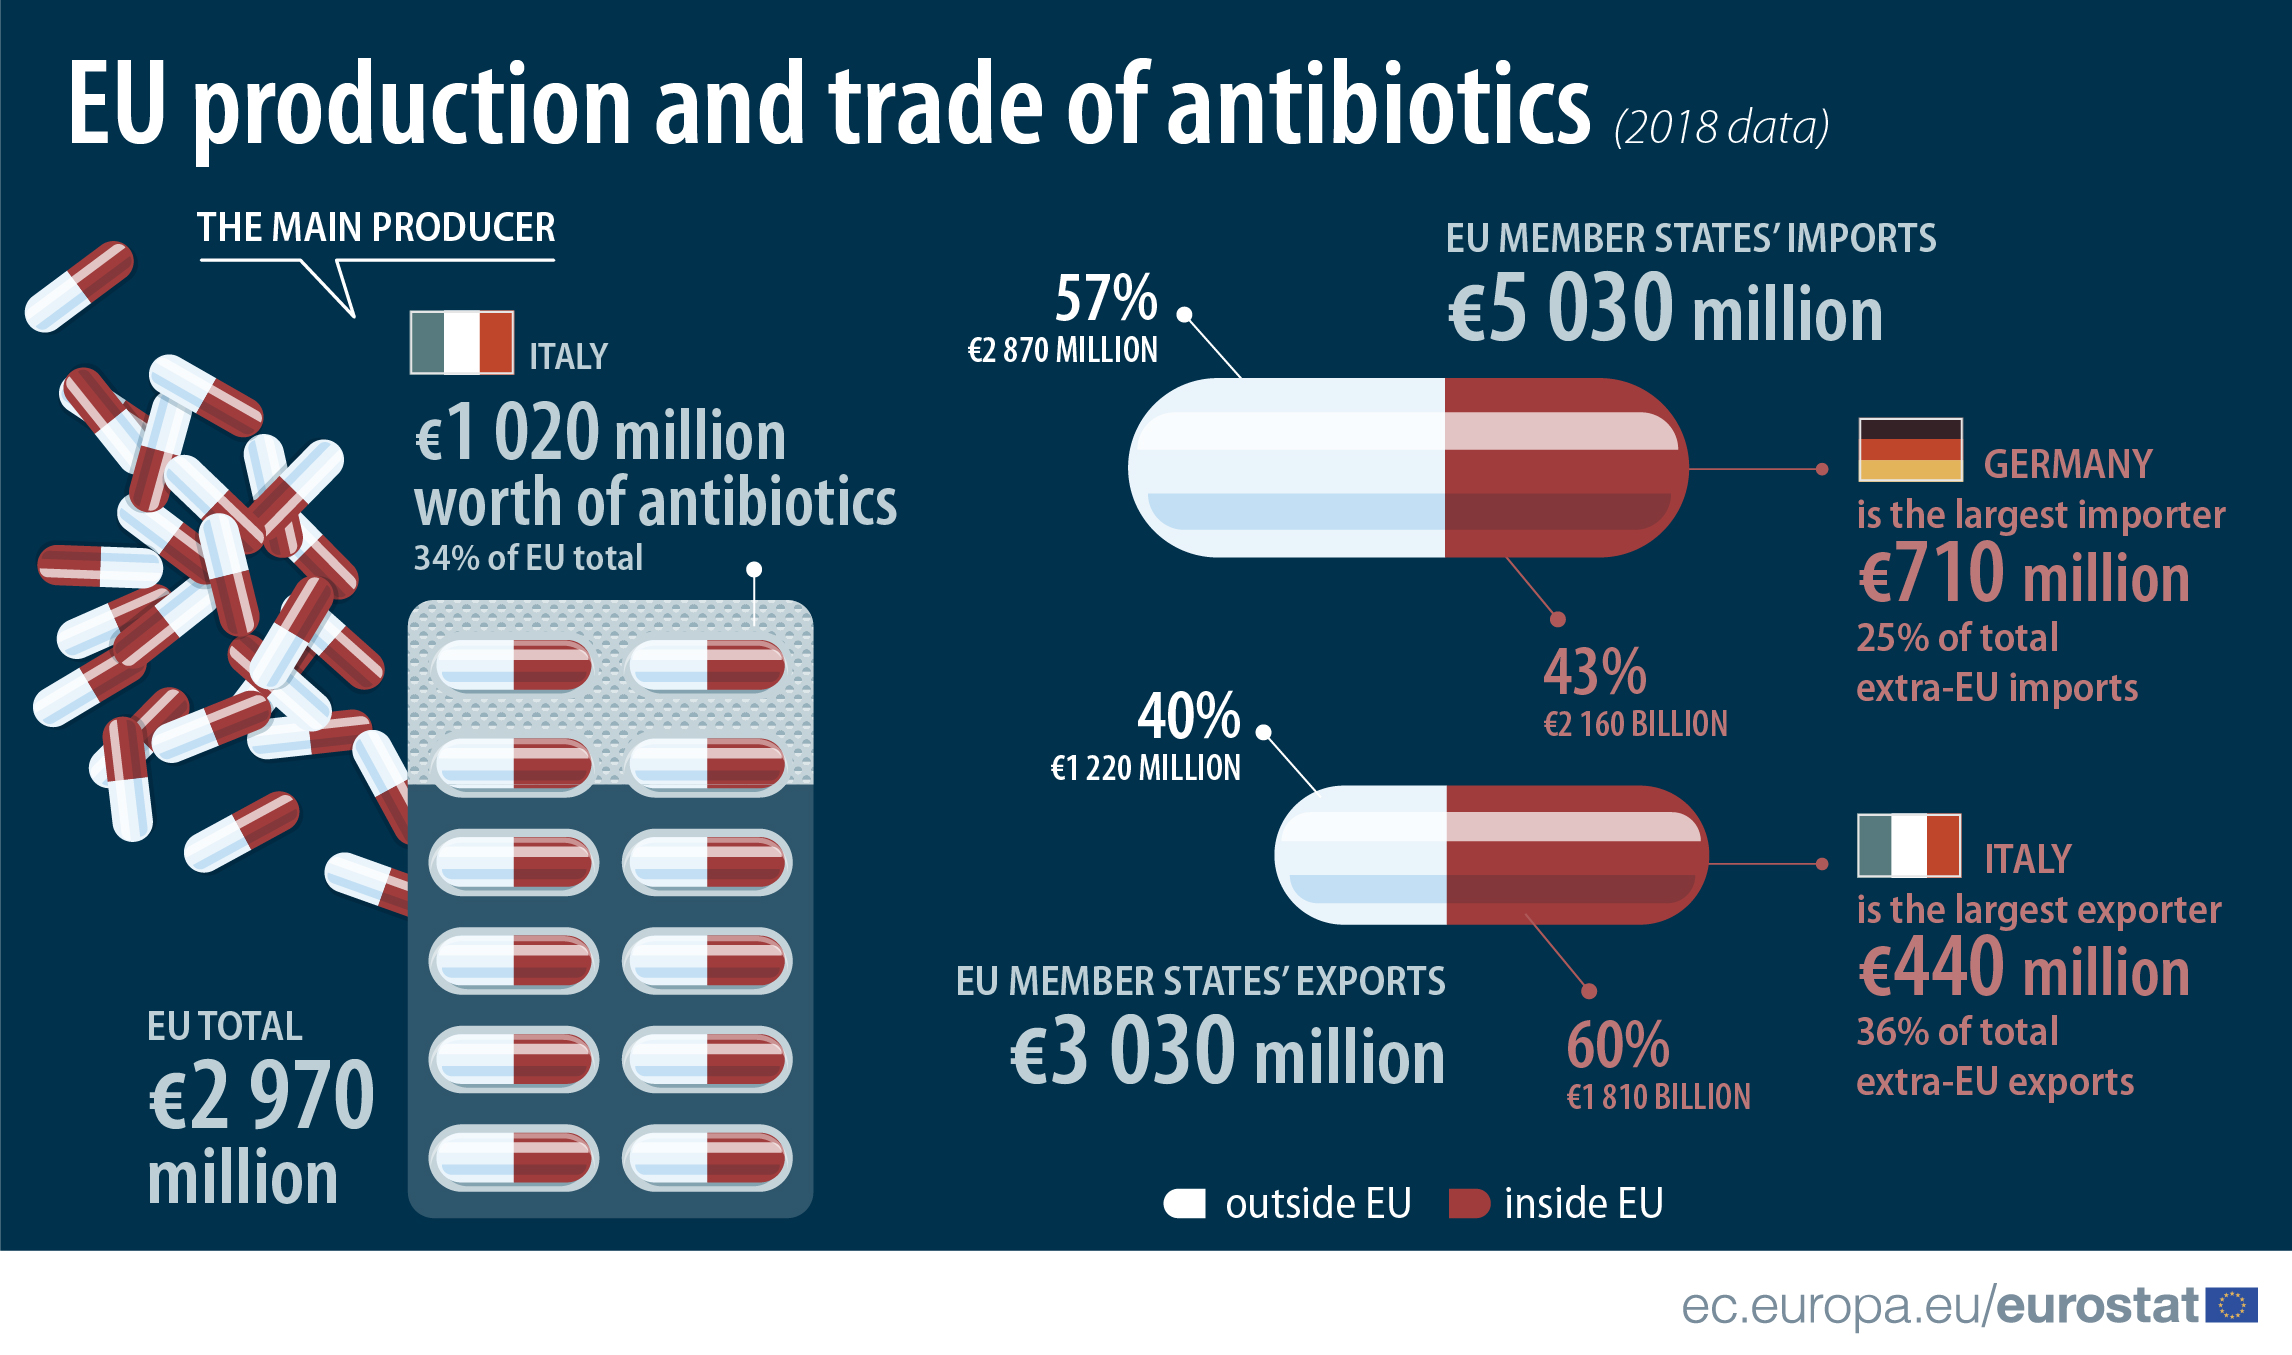 where are most antibiotics produced